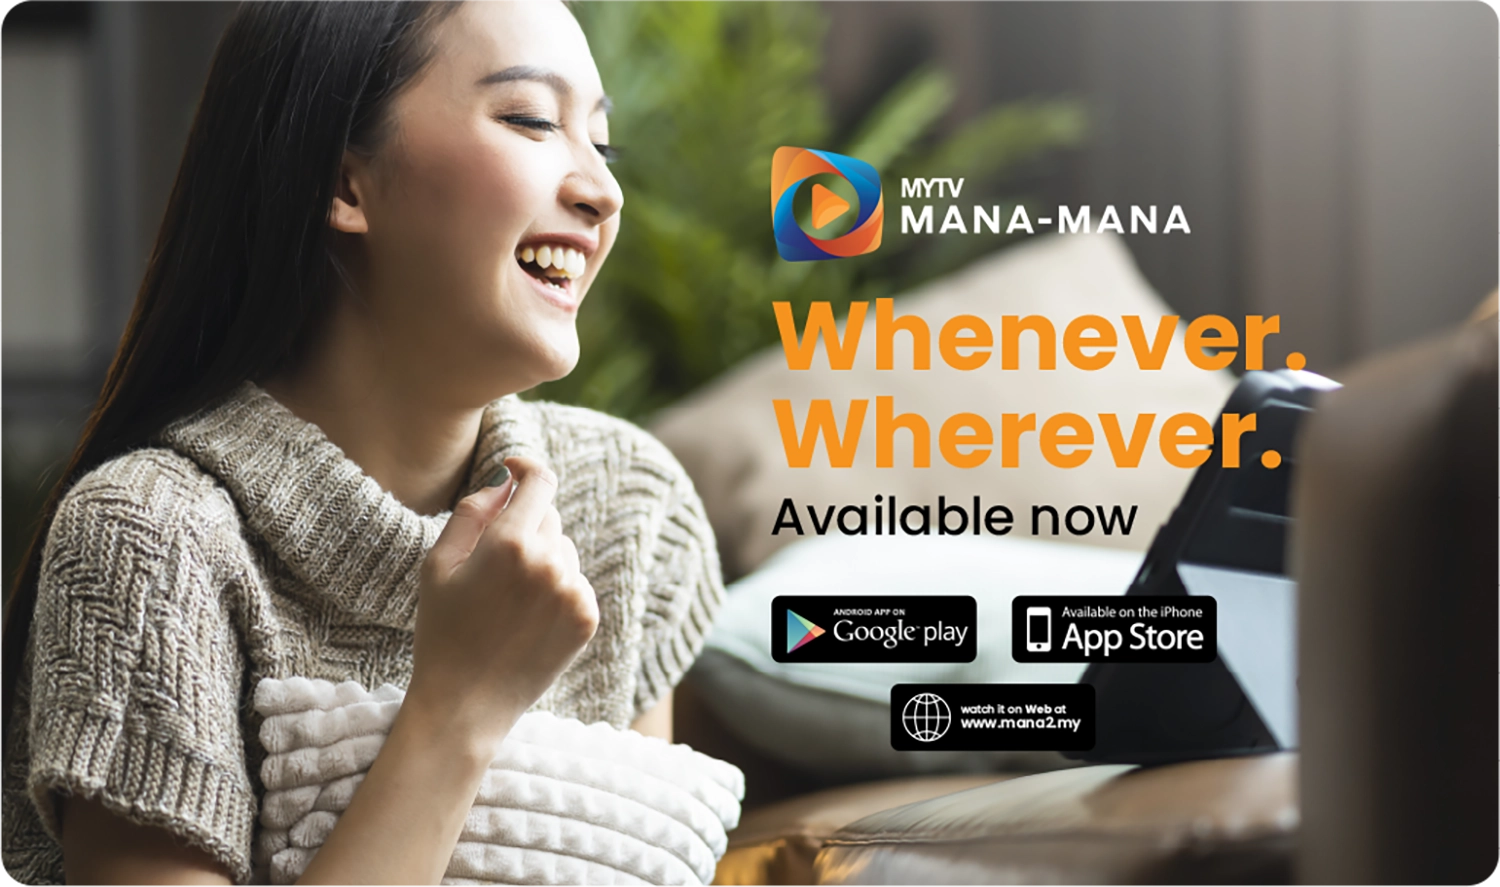 Watch the best movies, the best channels, all in one place. Visit mana2.my now!